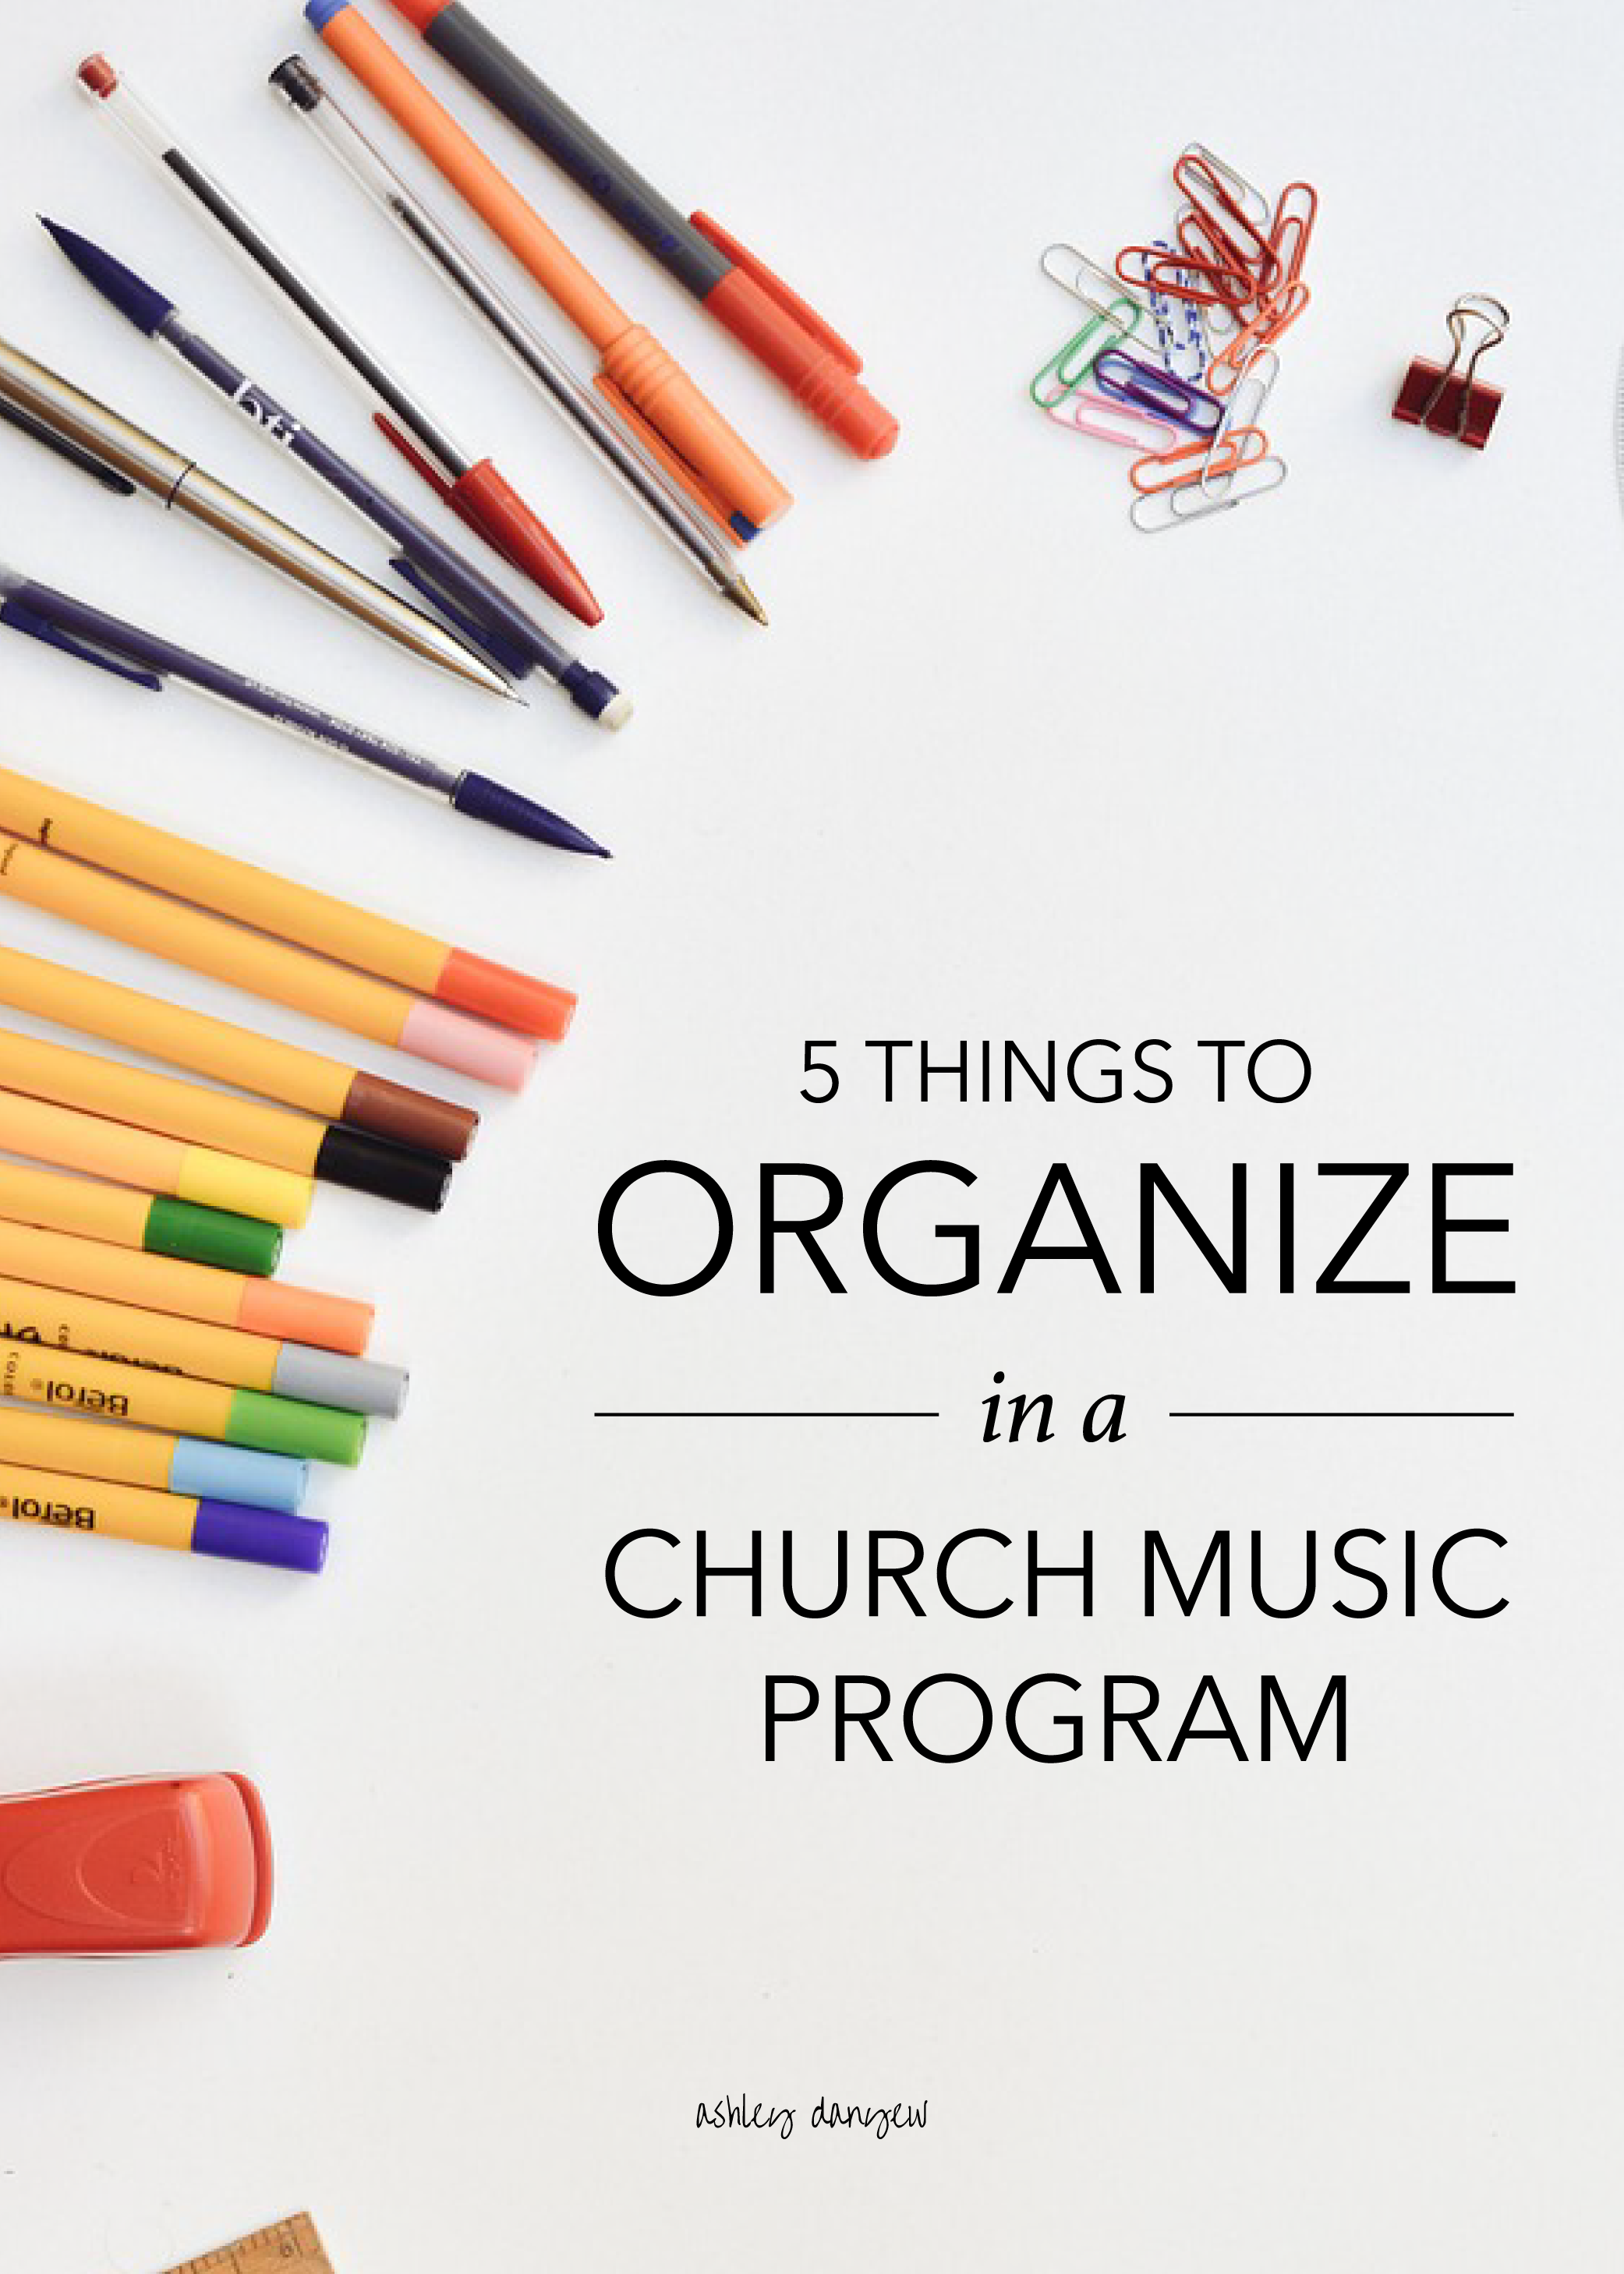 Copy of 5 Things to Organize in a Church Music Program